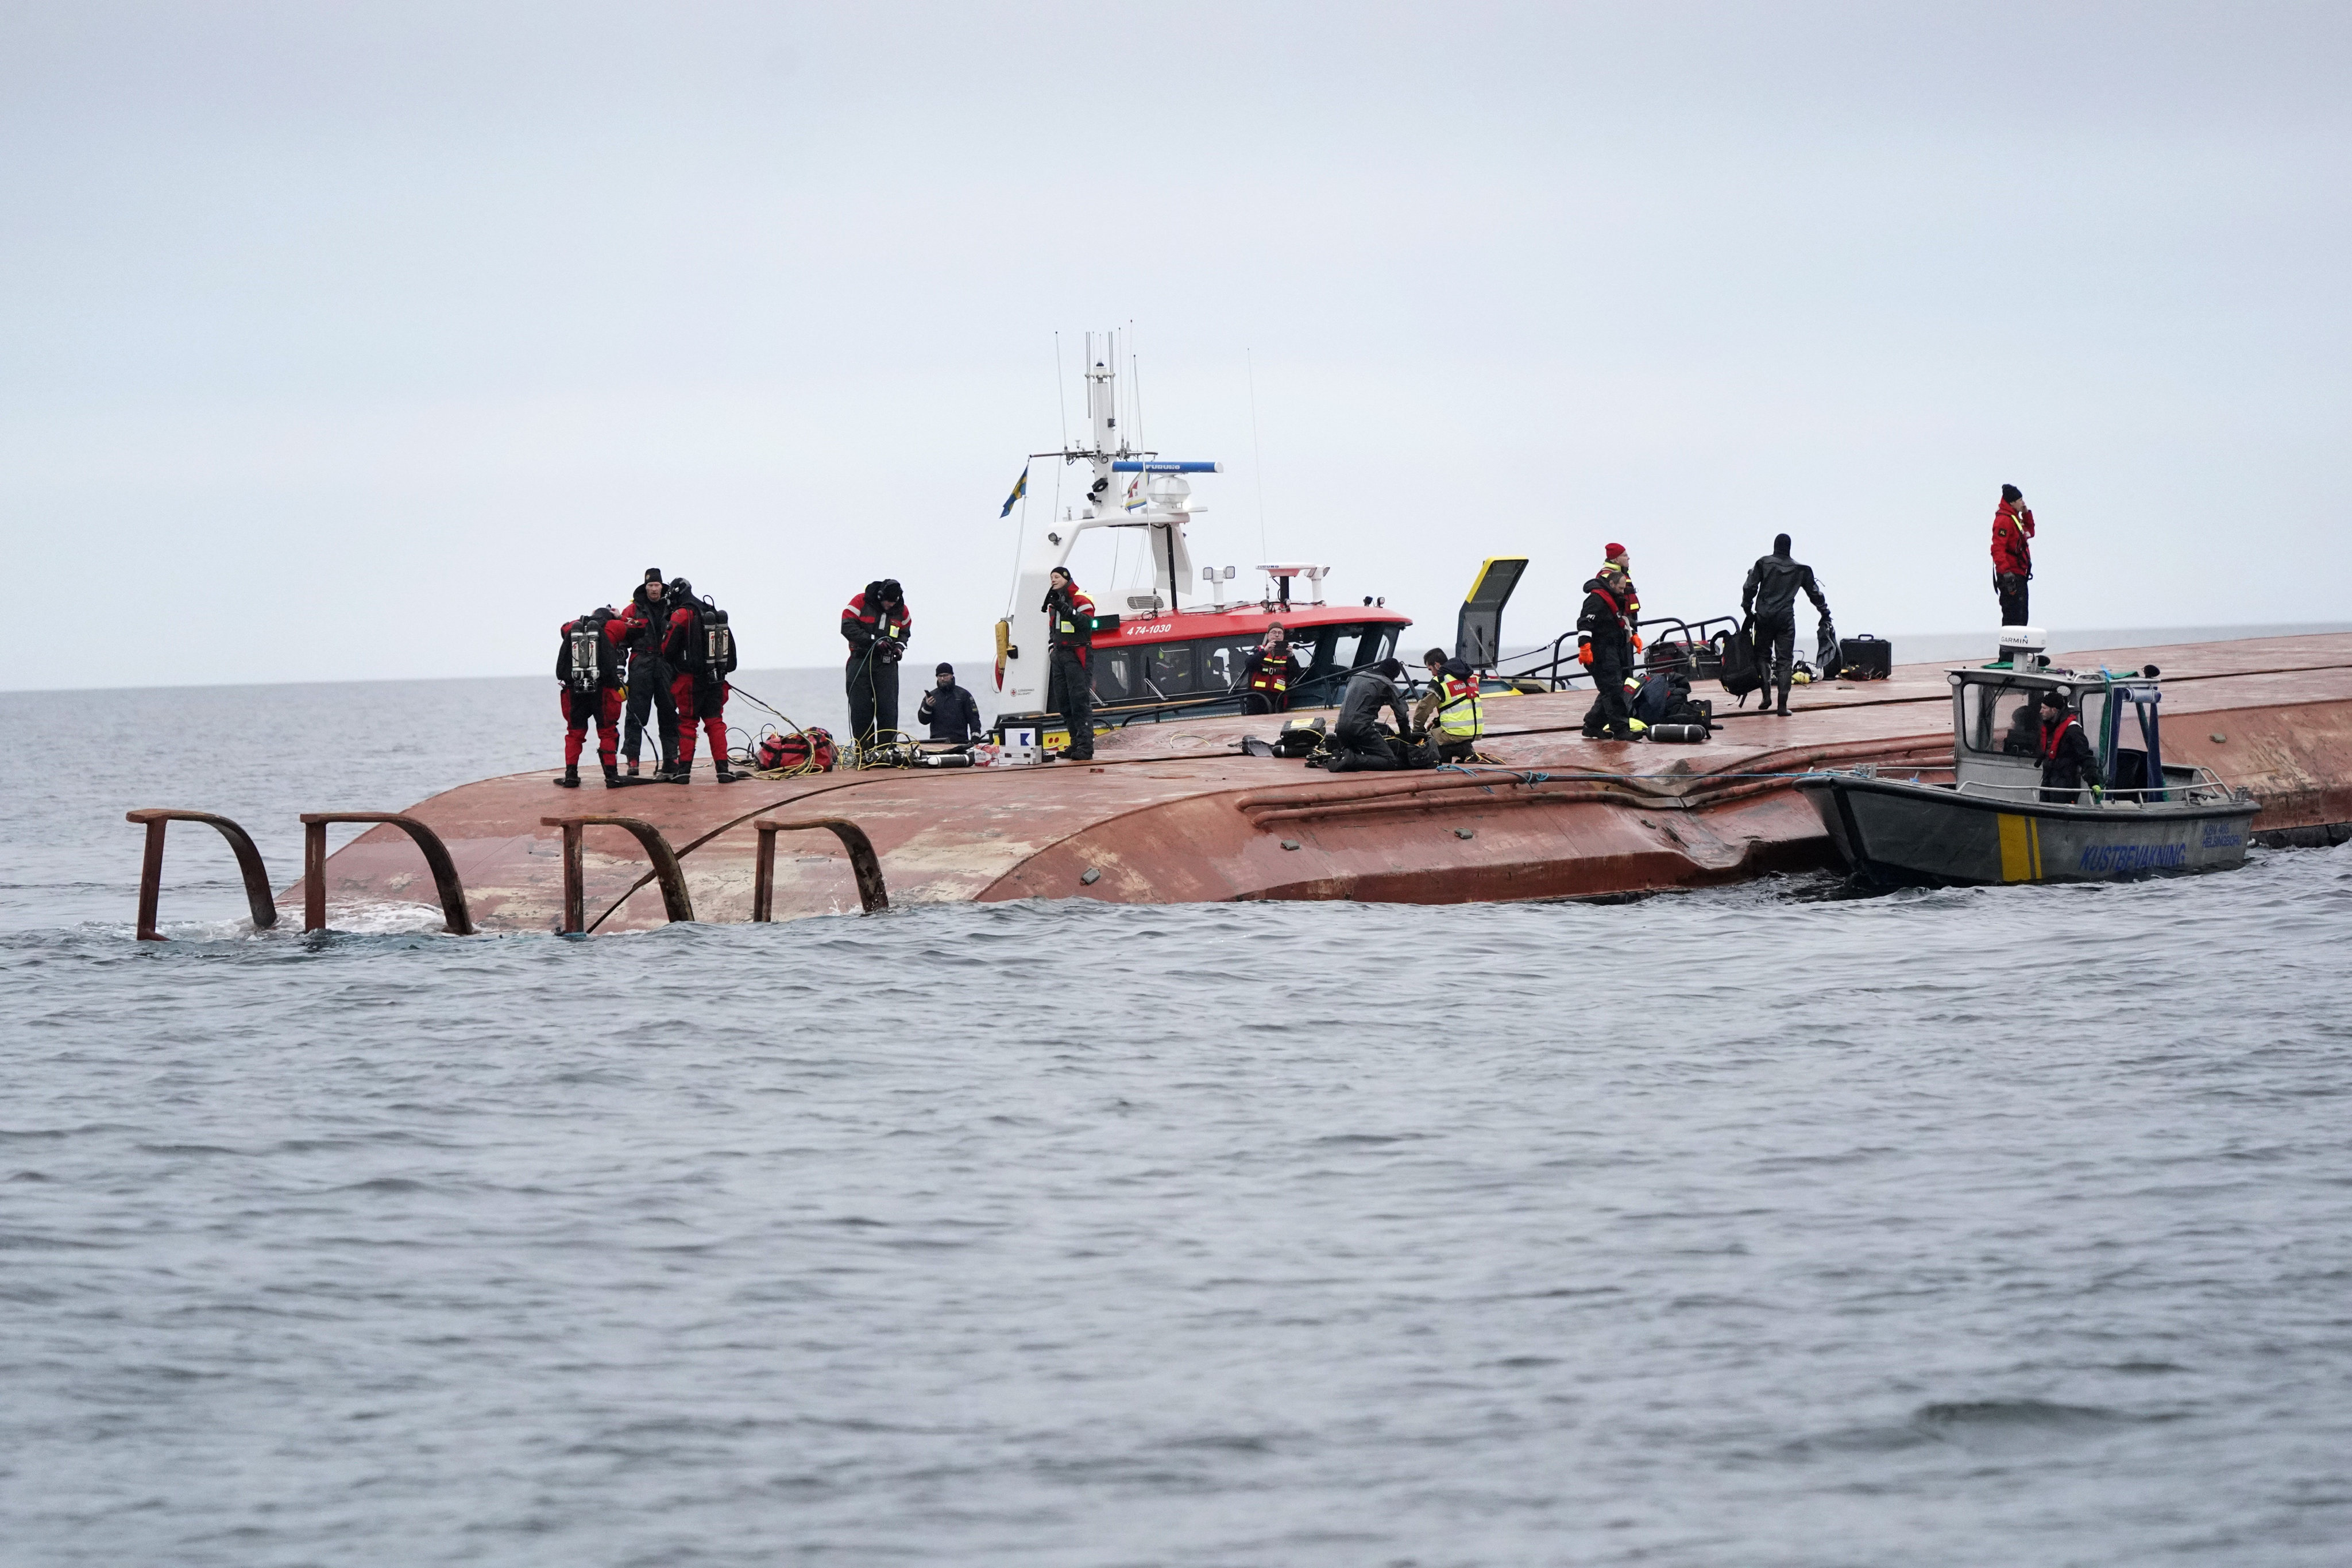 Divers work on the capsized Danish cargo ship Karin Hoj after it collided with British cargo vessel Scot Carrier in the Baltic Sea on Monday. Photo: AP